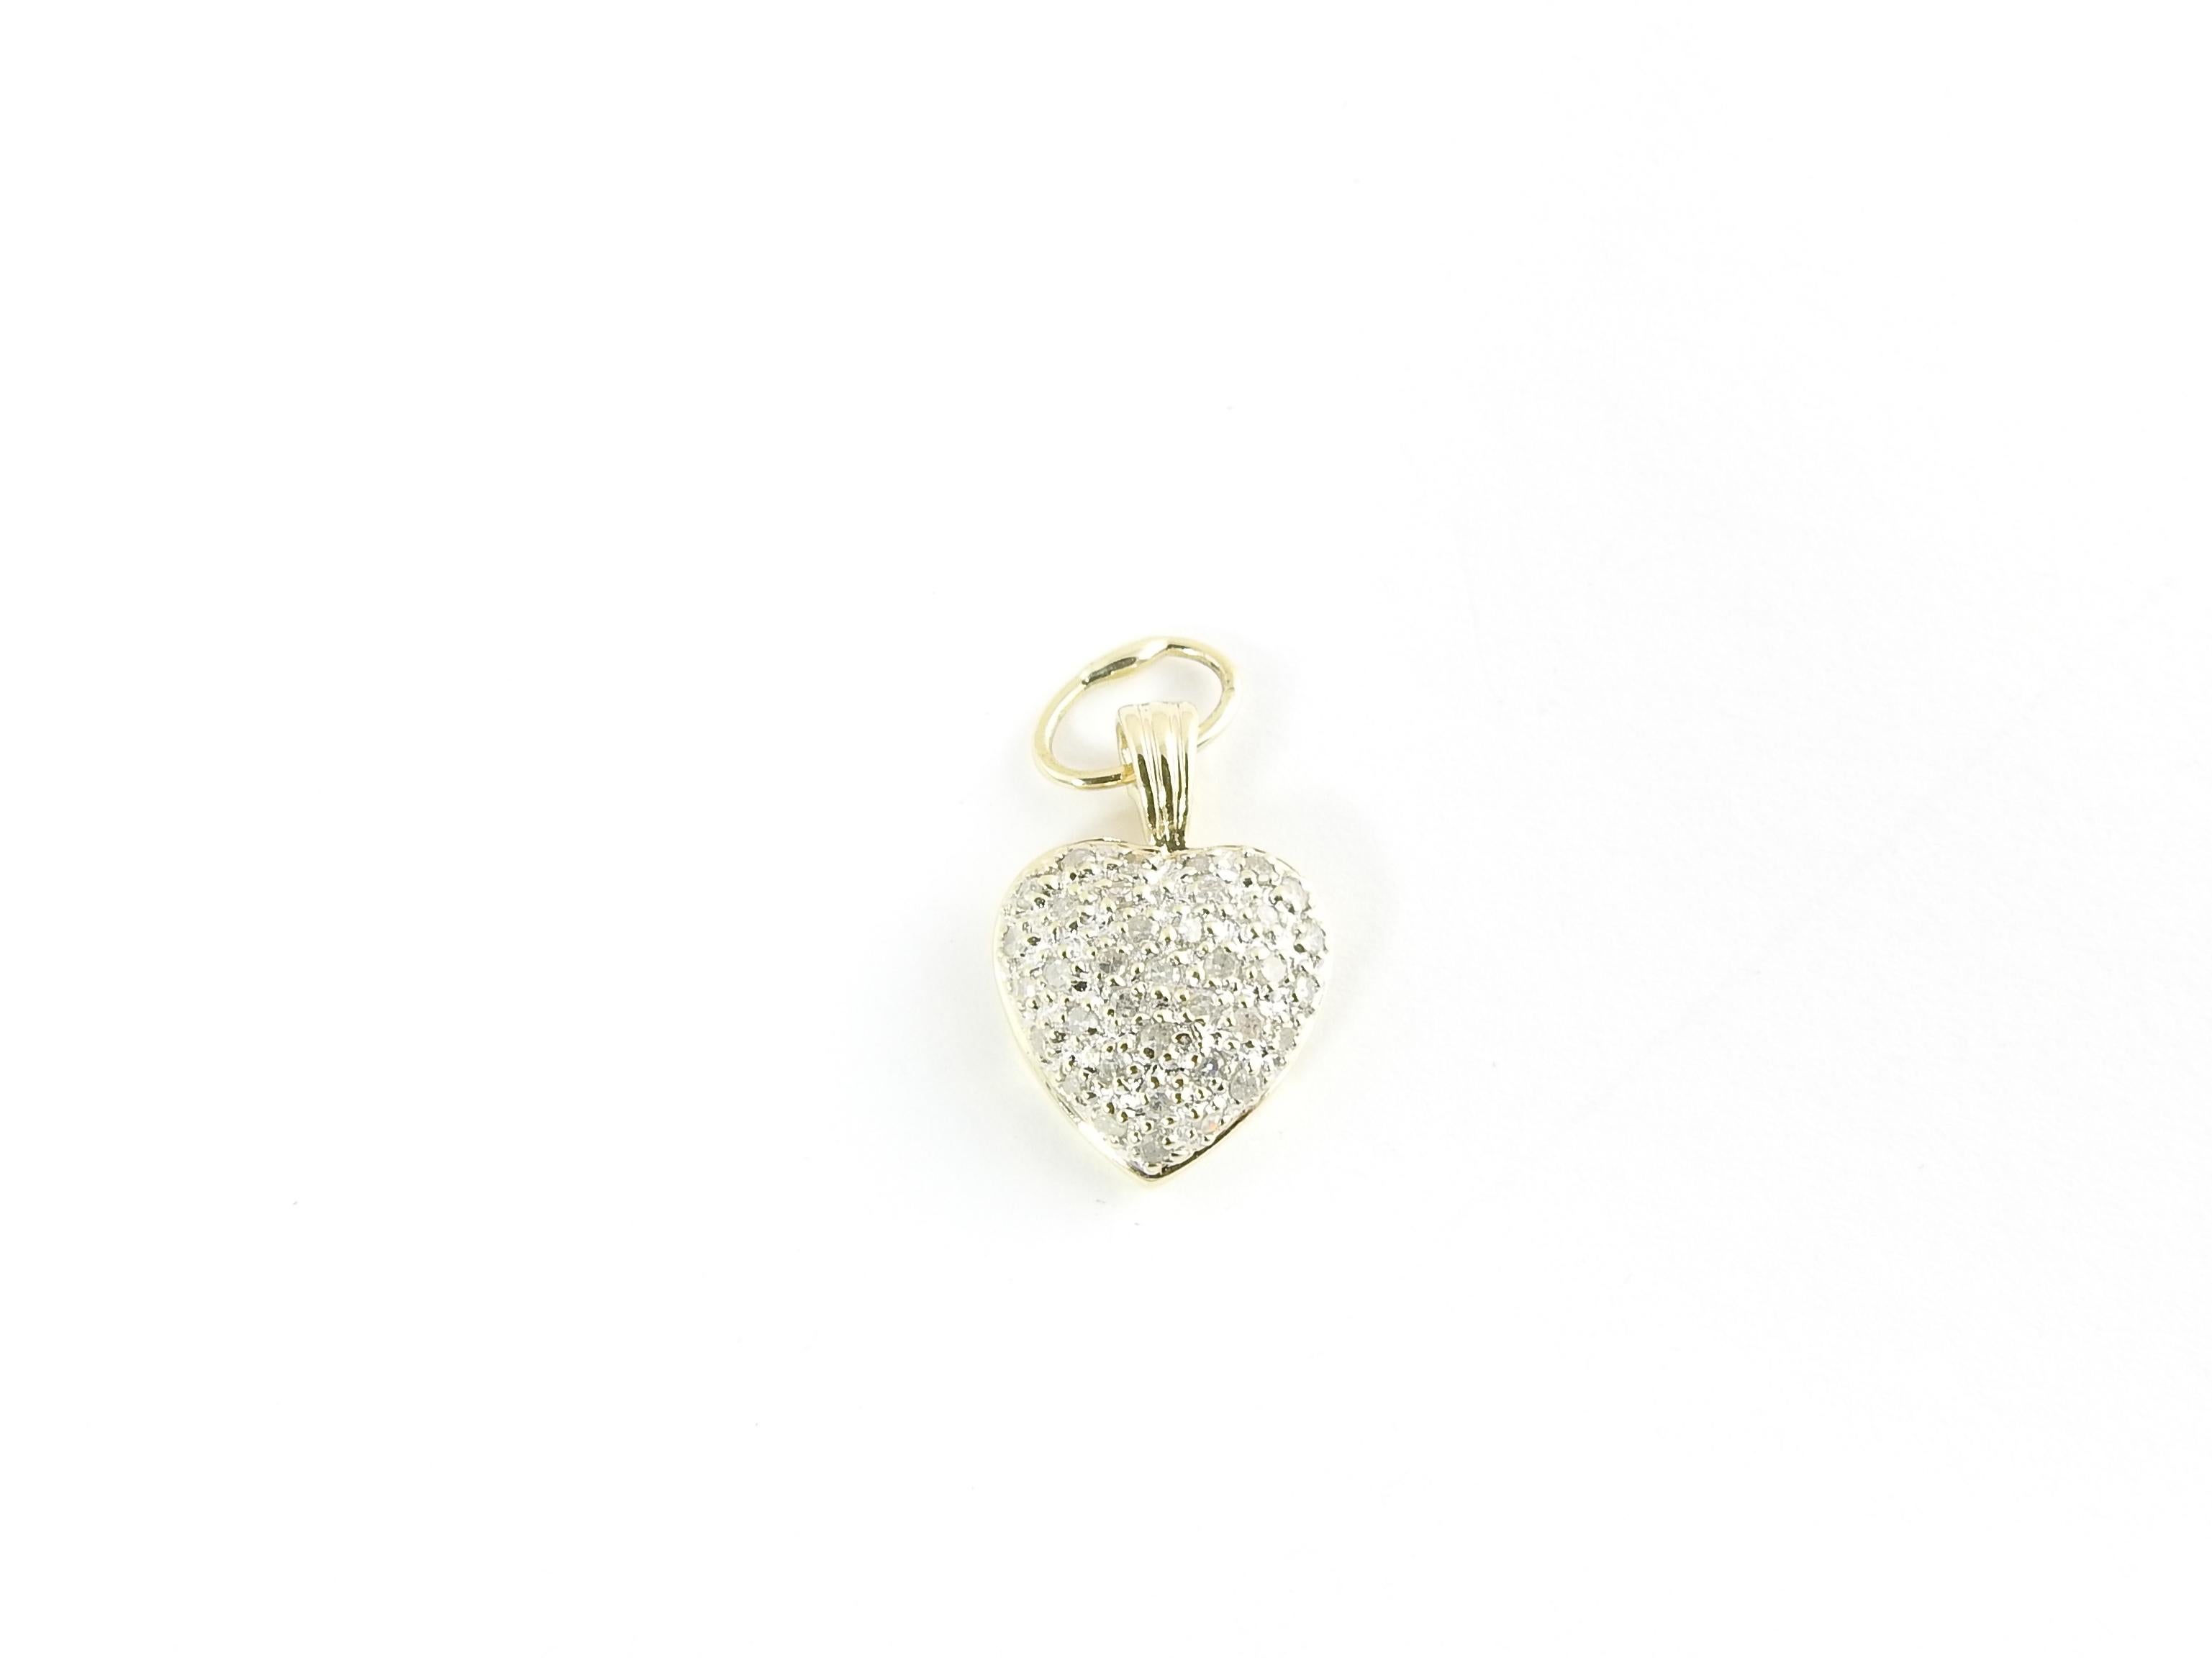 Vintage 14 Karat Yellow Gold Diamond Heart Pendant

This sparkling pendant features 24 round single cut diamonds pave set in classic 14K yellow gold.

Approximate total diamond weight: .24 ct.

Diamond color: J

Diamond clarity: I3

Size: 17 mm x 12